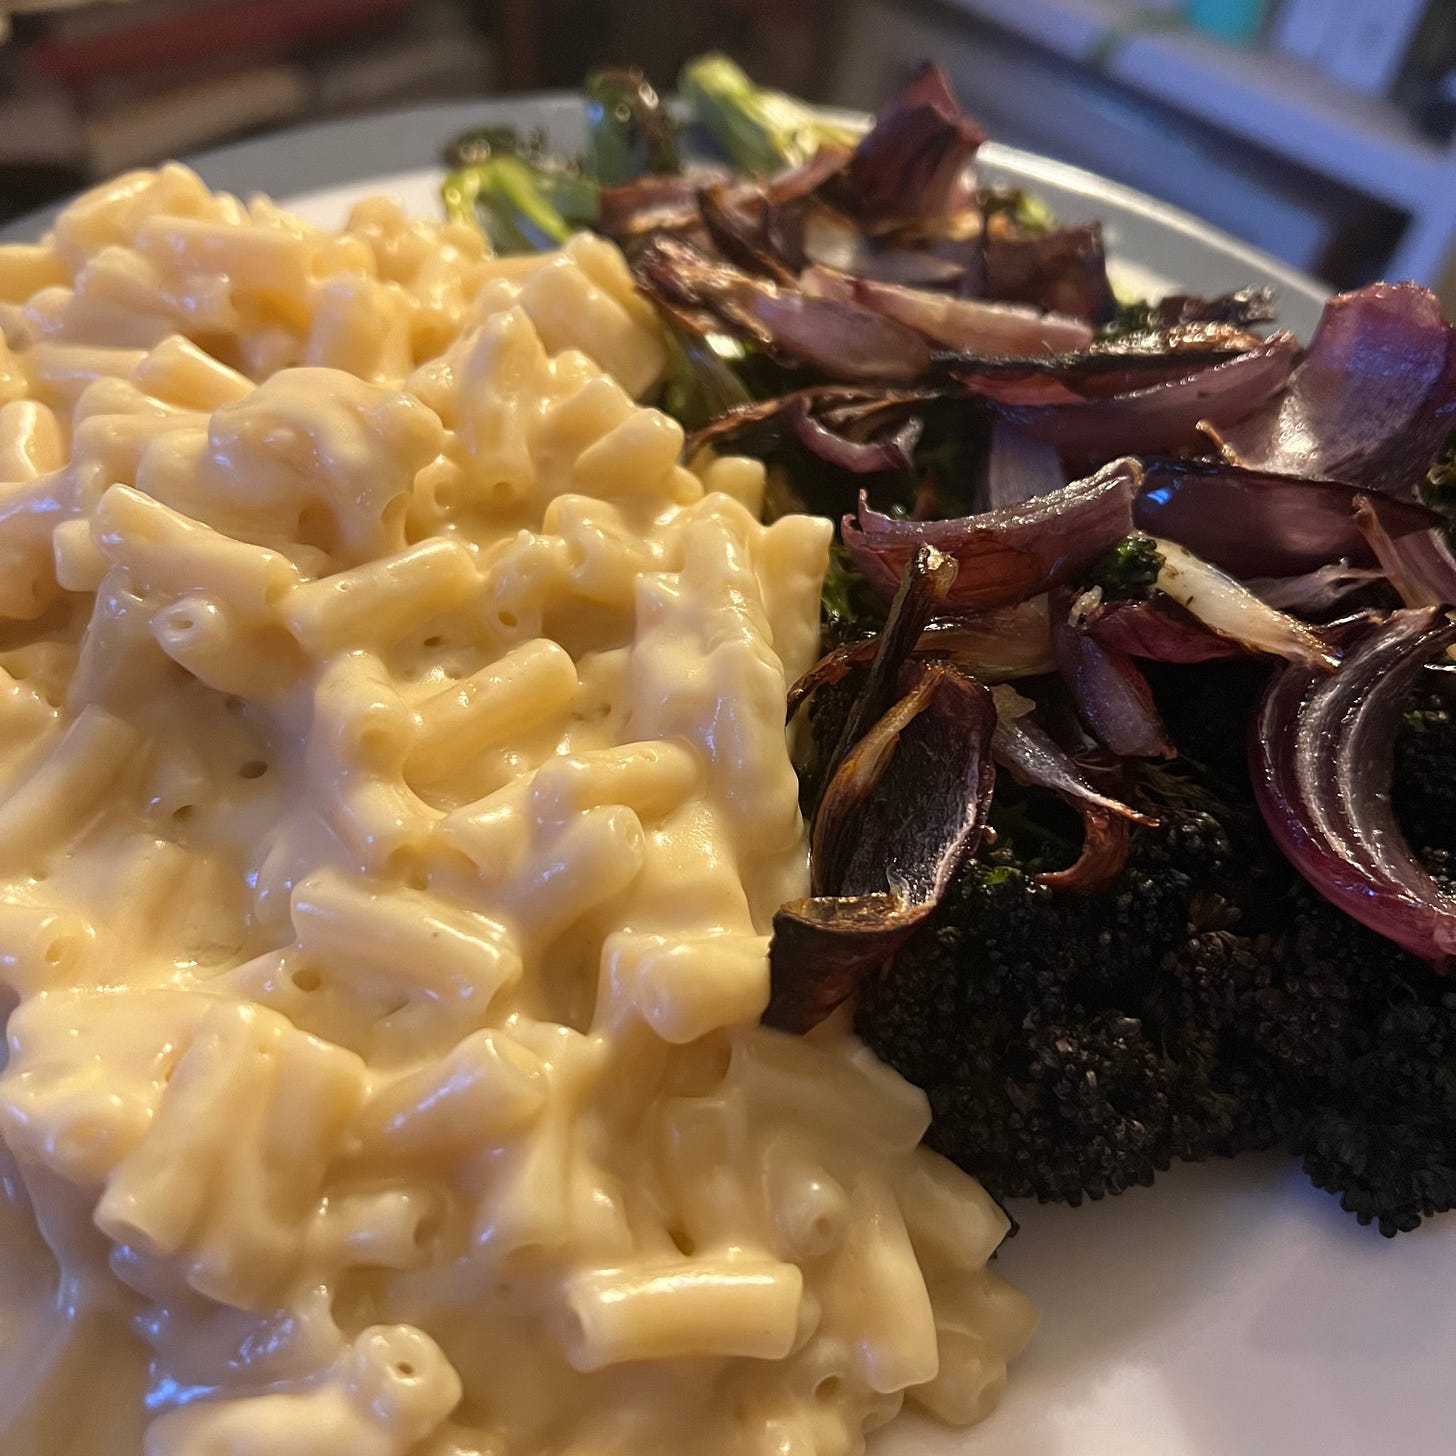 A picture of my version of the 3 ingredient Mac & cheese with roasted broccoli & onion